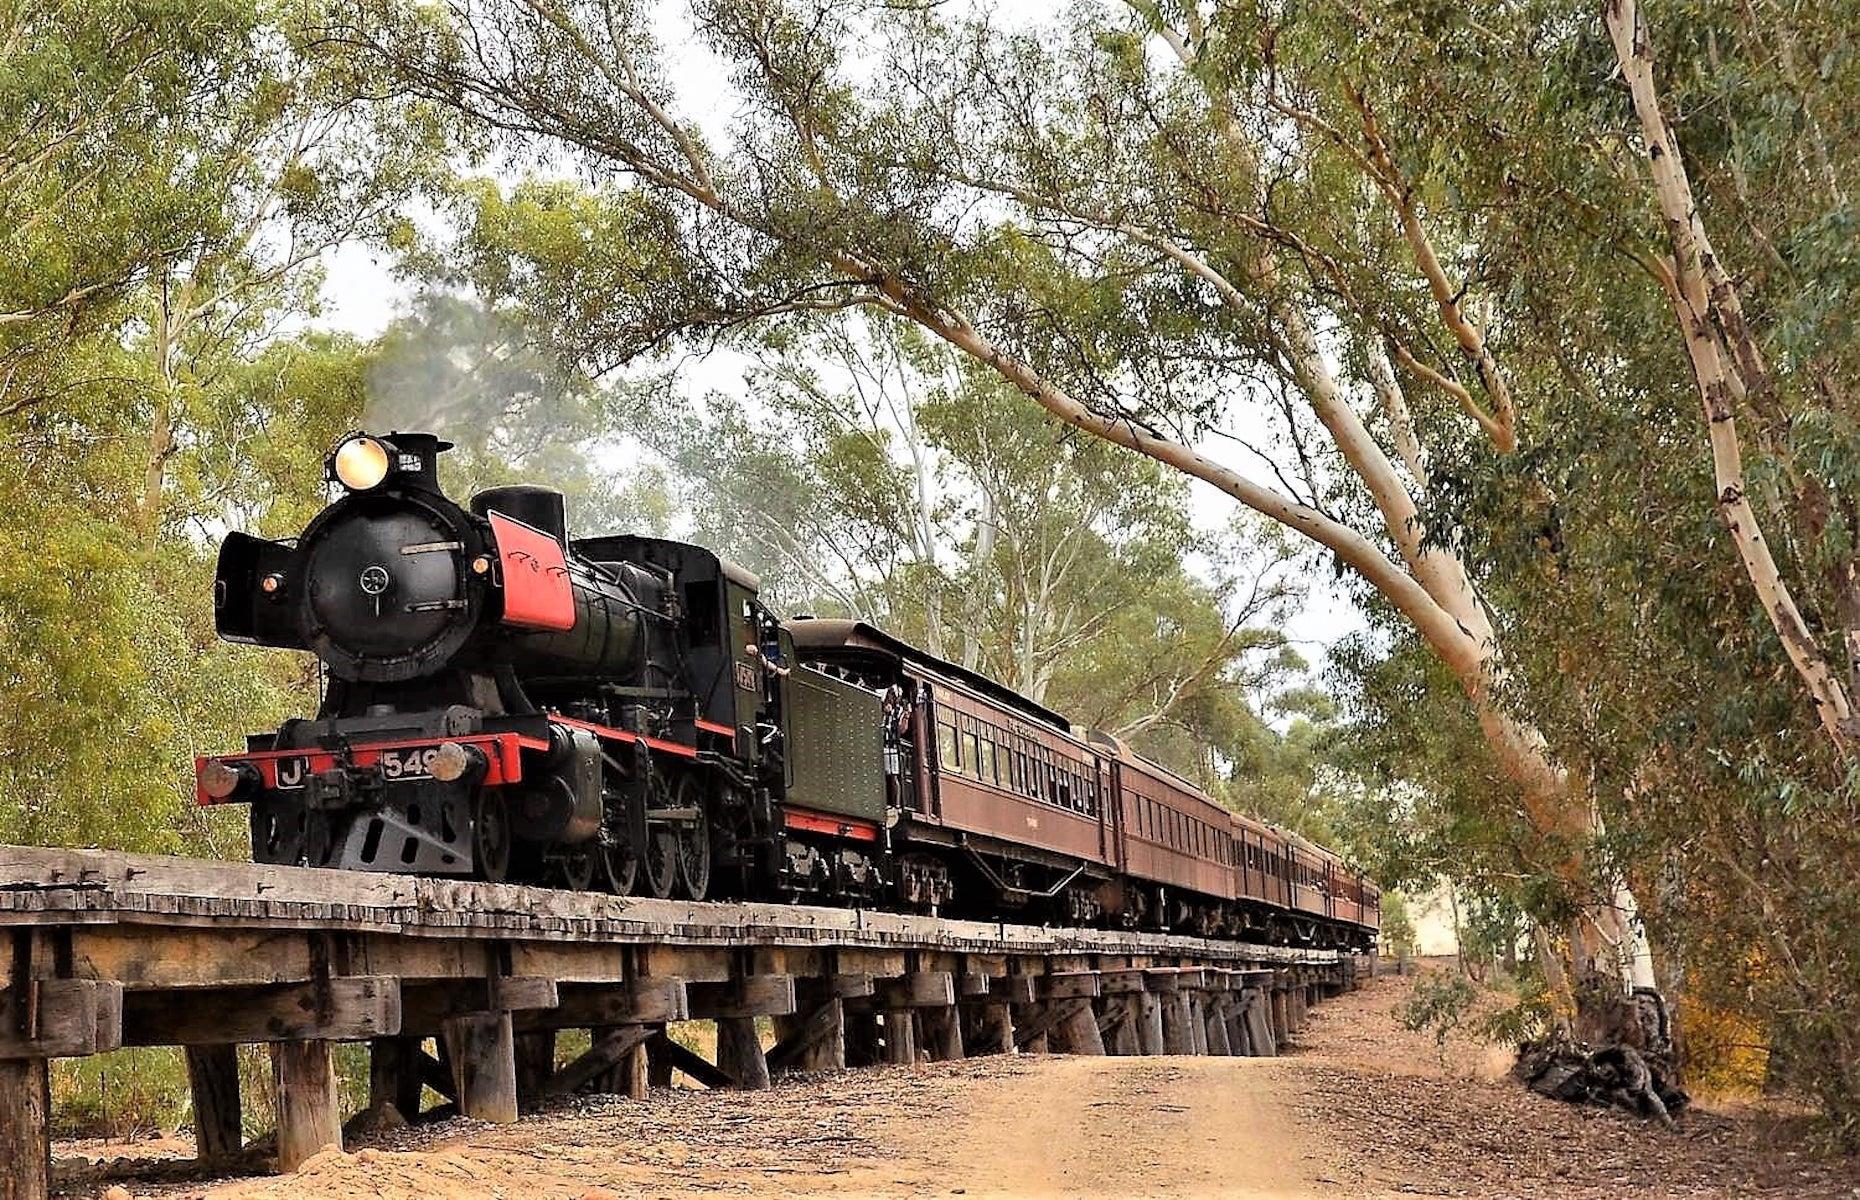 <p>Journey back into the gold rush era aboard <a href="http://www.vgr.com.au/homepage.php">Victoria Goldfields Railway's</a> steam heritage train that chugs between the historic towns of Castlemaine and Maldon in central Victoria. Opt for the excursion class or go for first class to ride in style in spacious Edwardian-era compartments that grant access to an open observation deck at the front.</p>